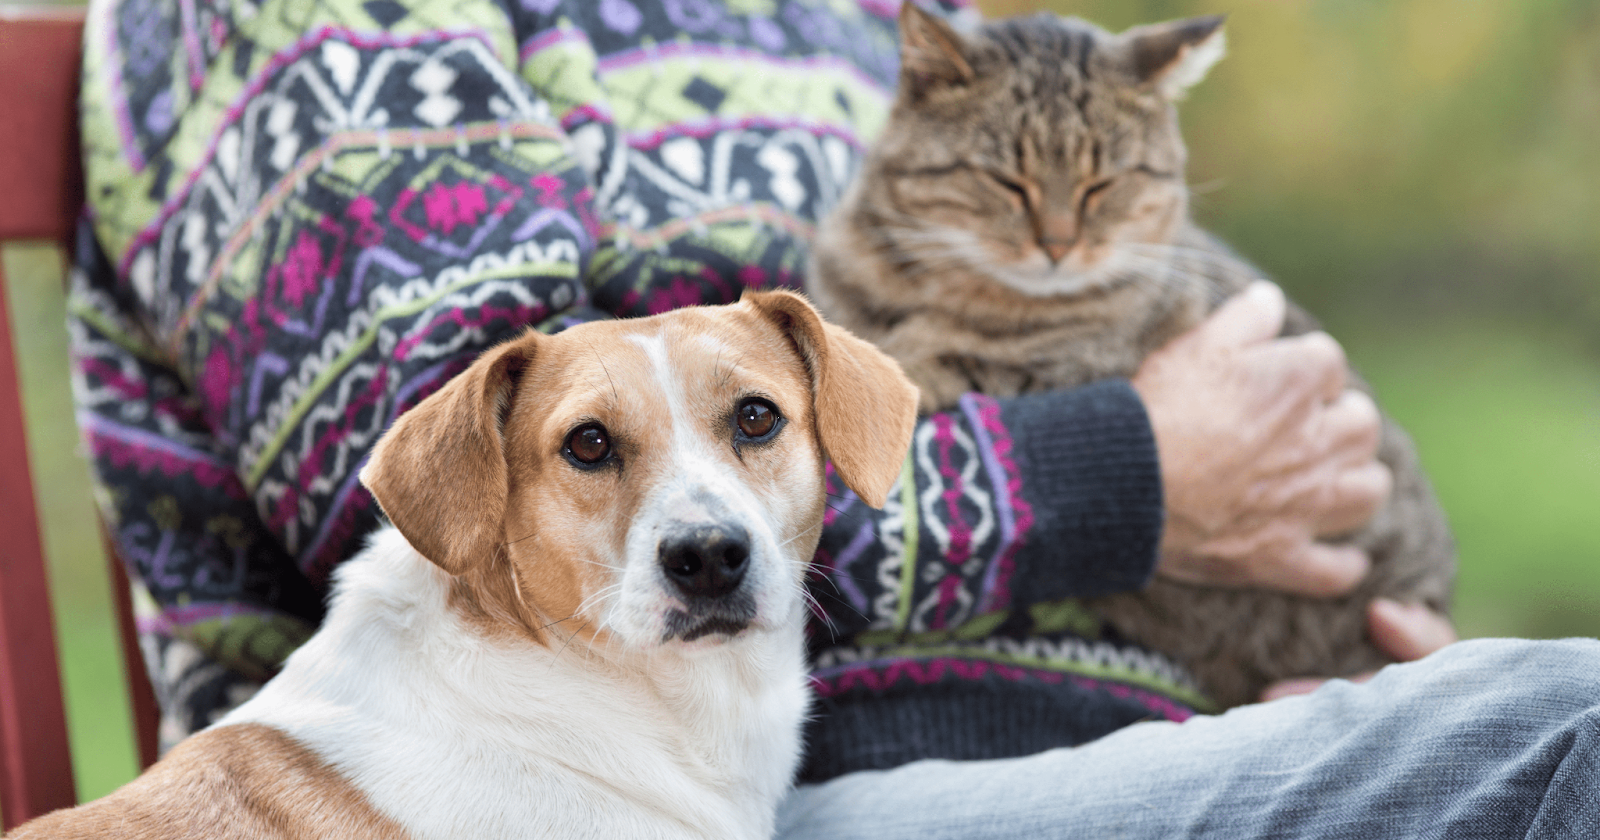 Person sitting on outdoor bench with cat on lap and dog by their side